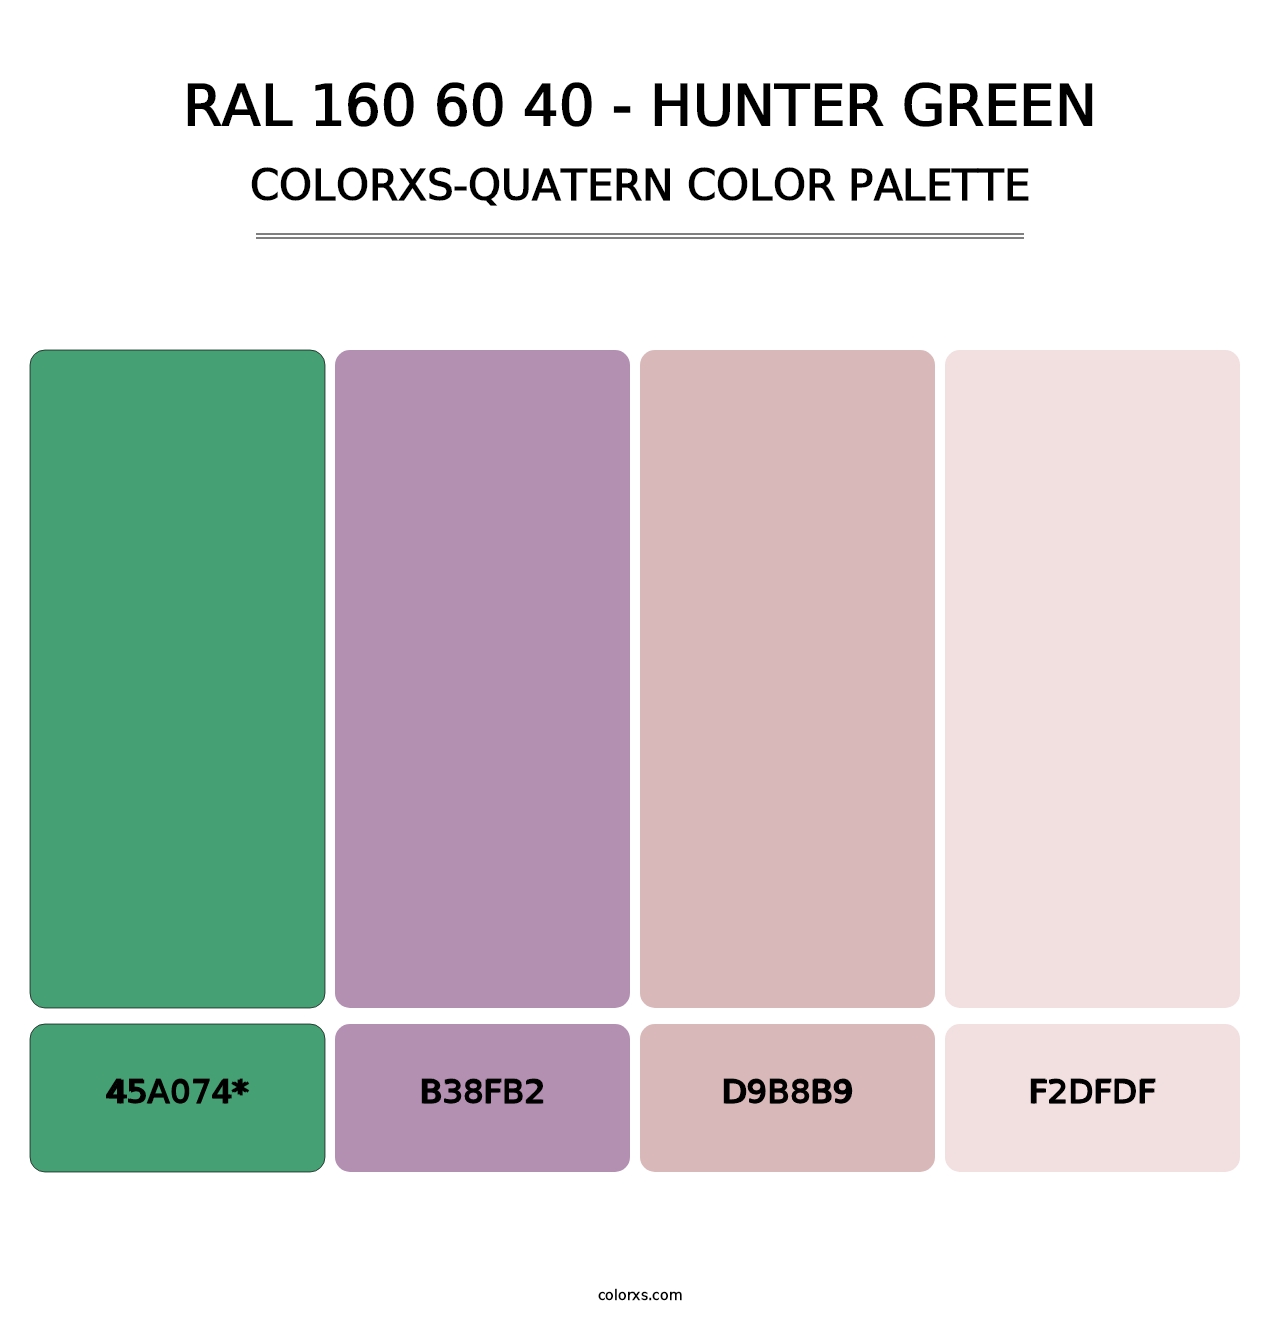 RAL 160 60 40 - Hunter Green - Colorxs Quatern Palette